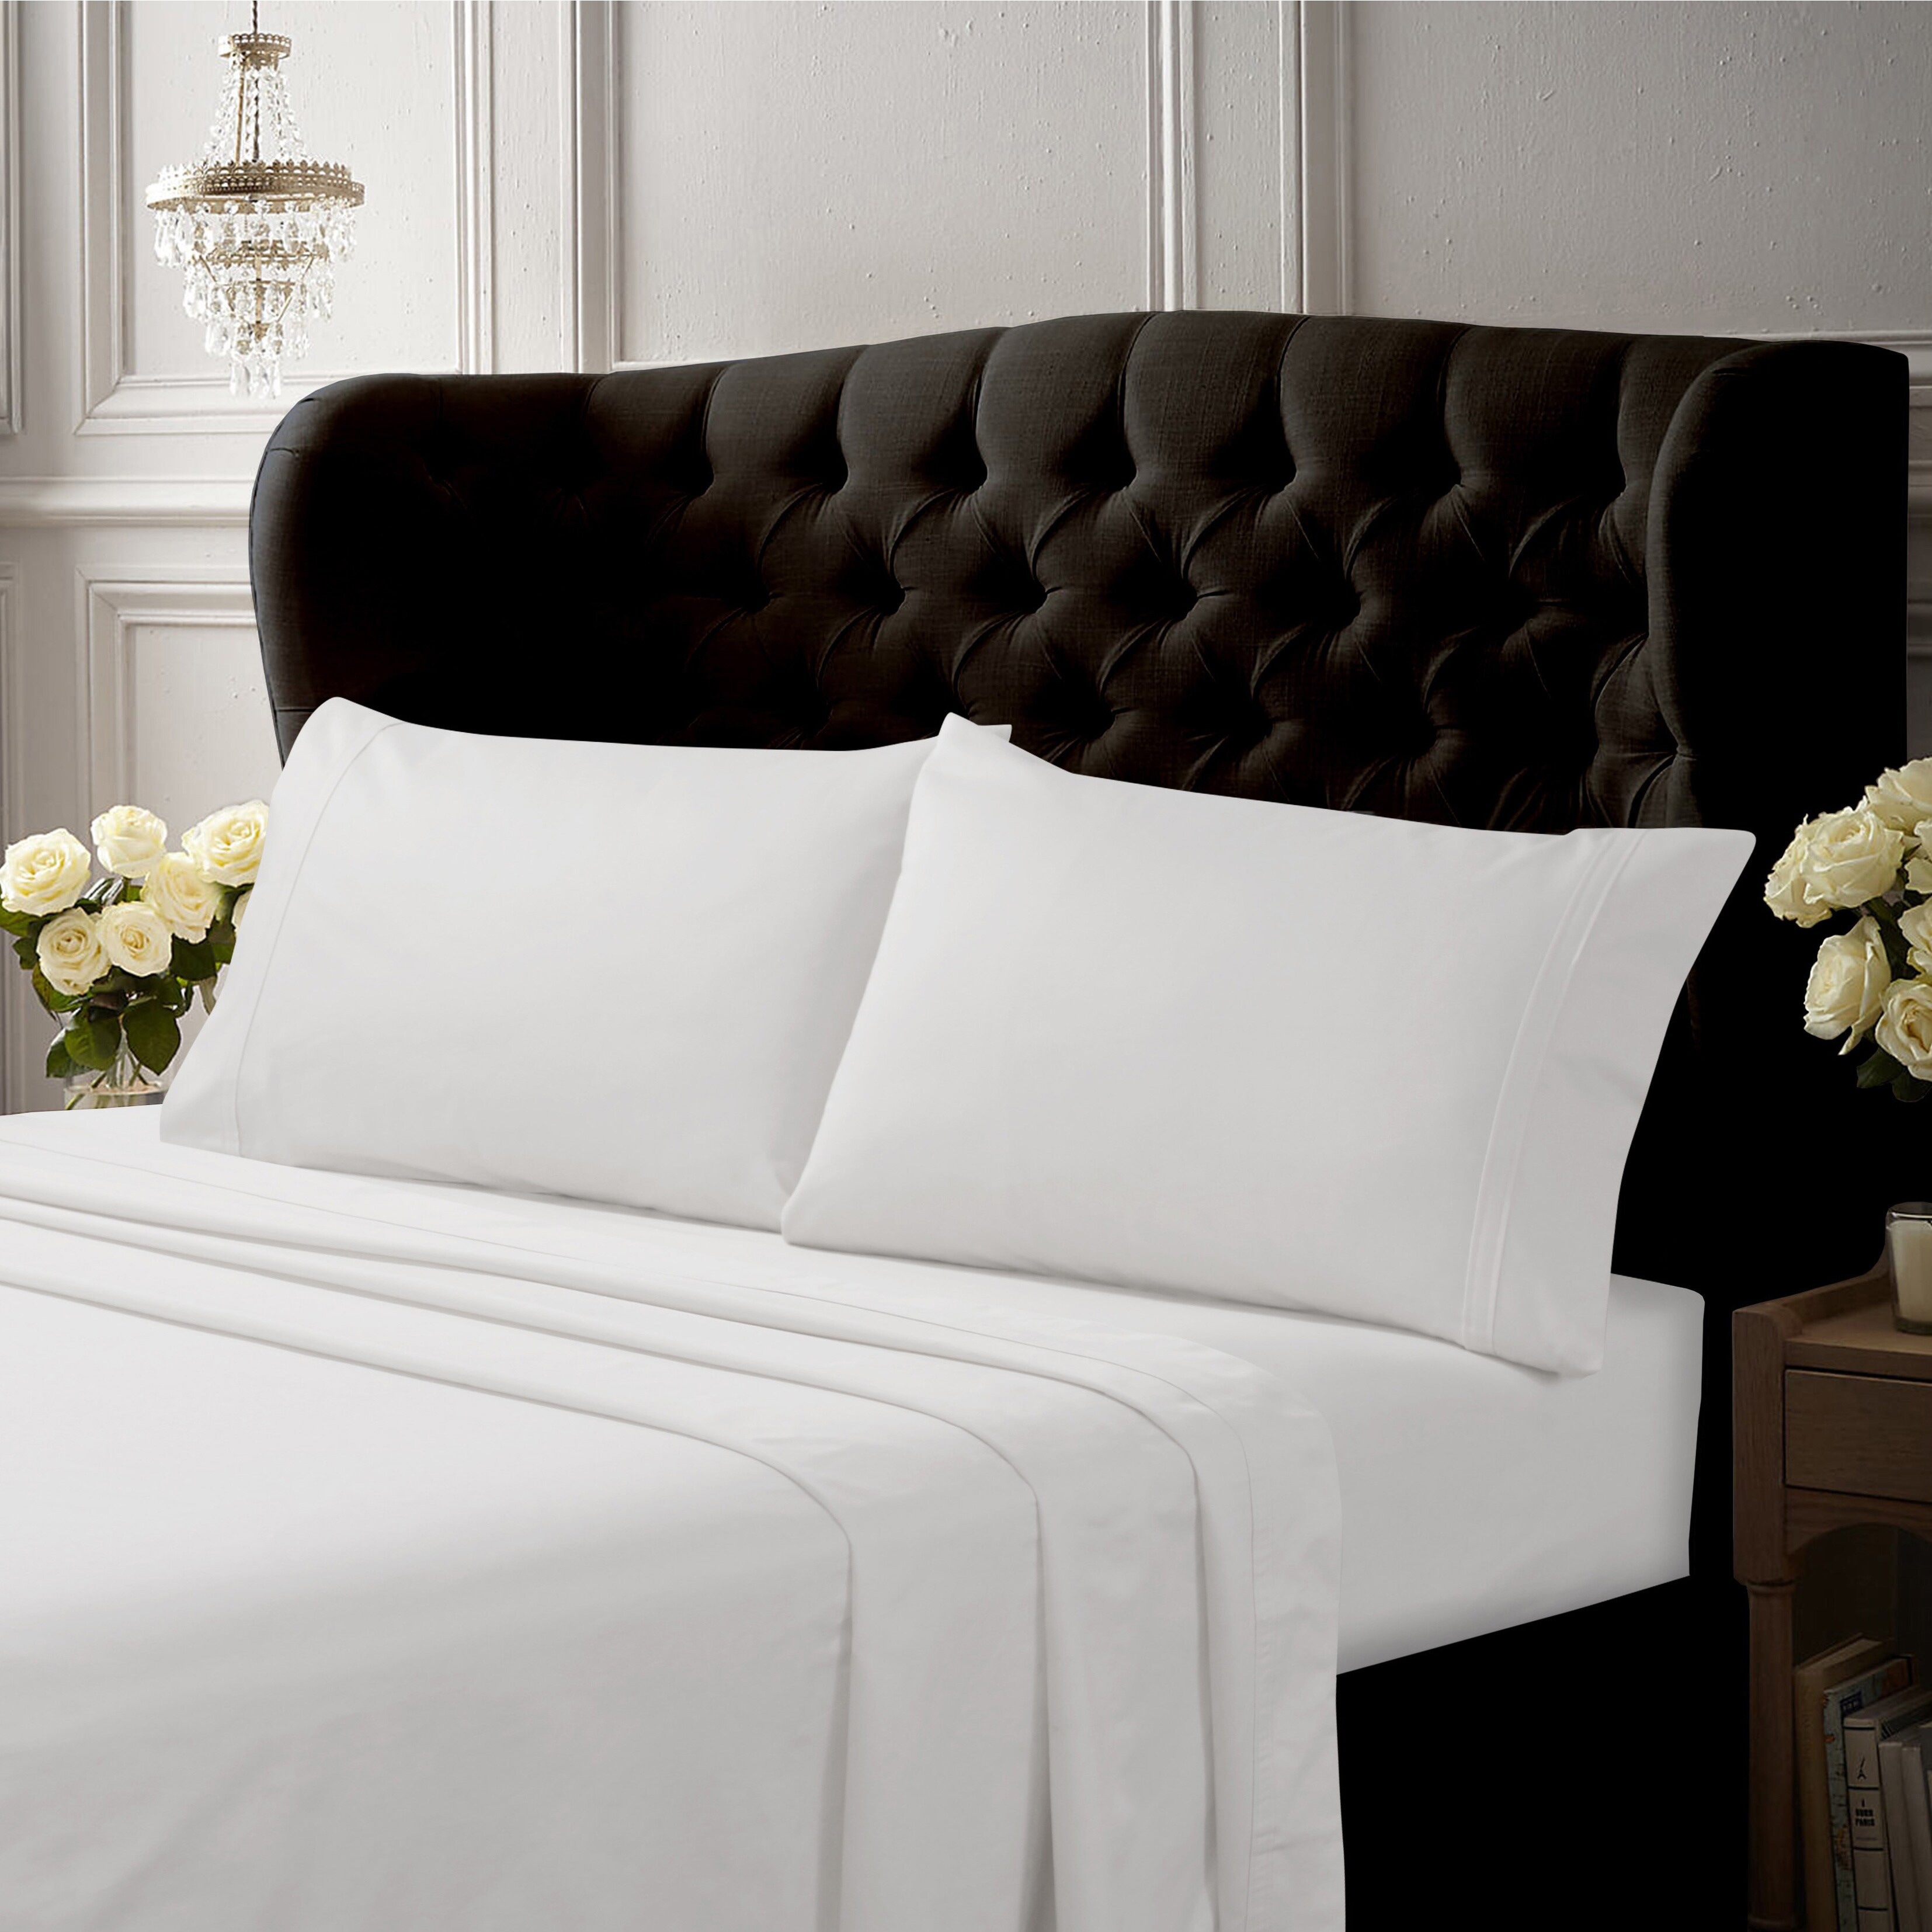 Luxury 100% Egyptian Cotton Extra Deep Fitted Sheets 200TC Flat Sheets All Sizes 